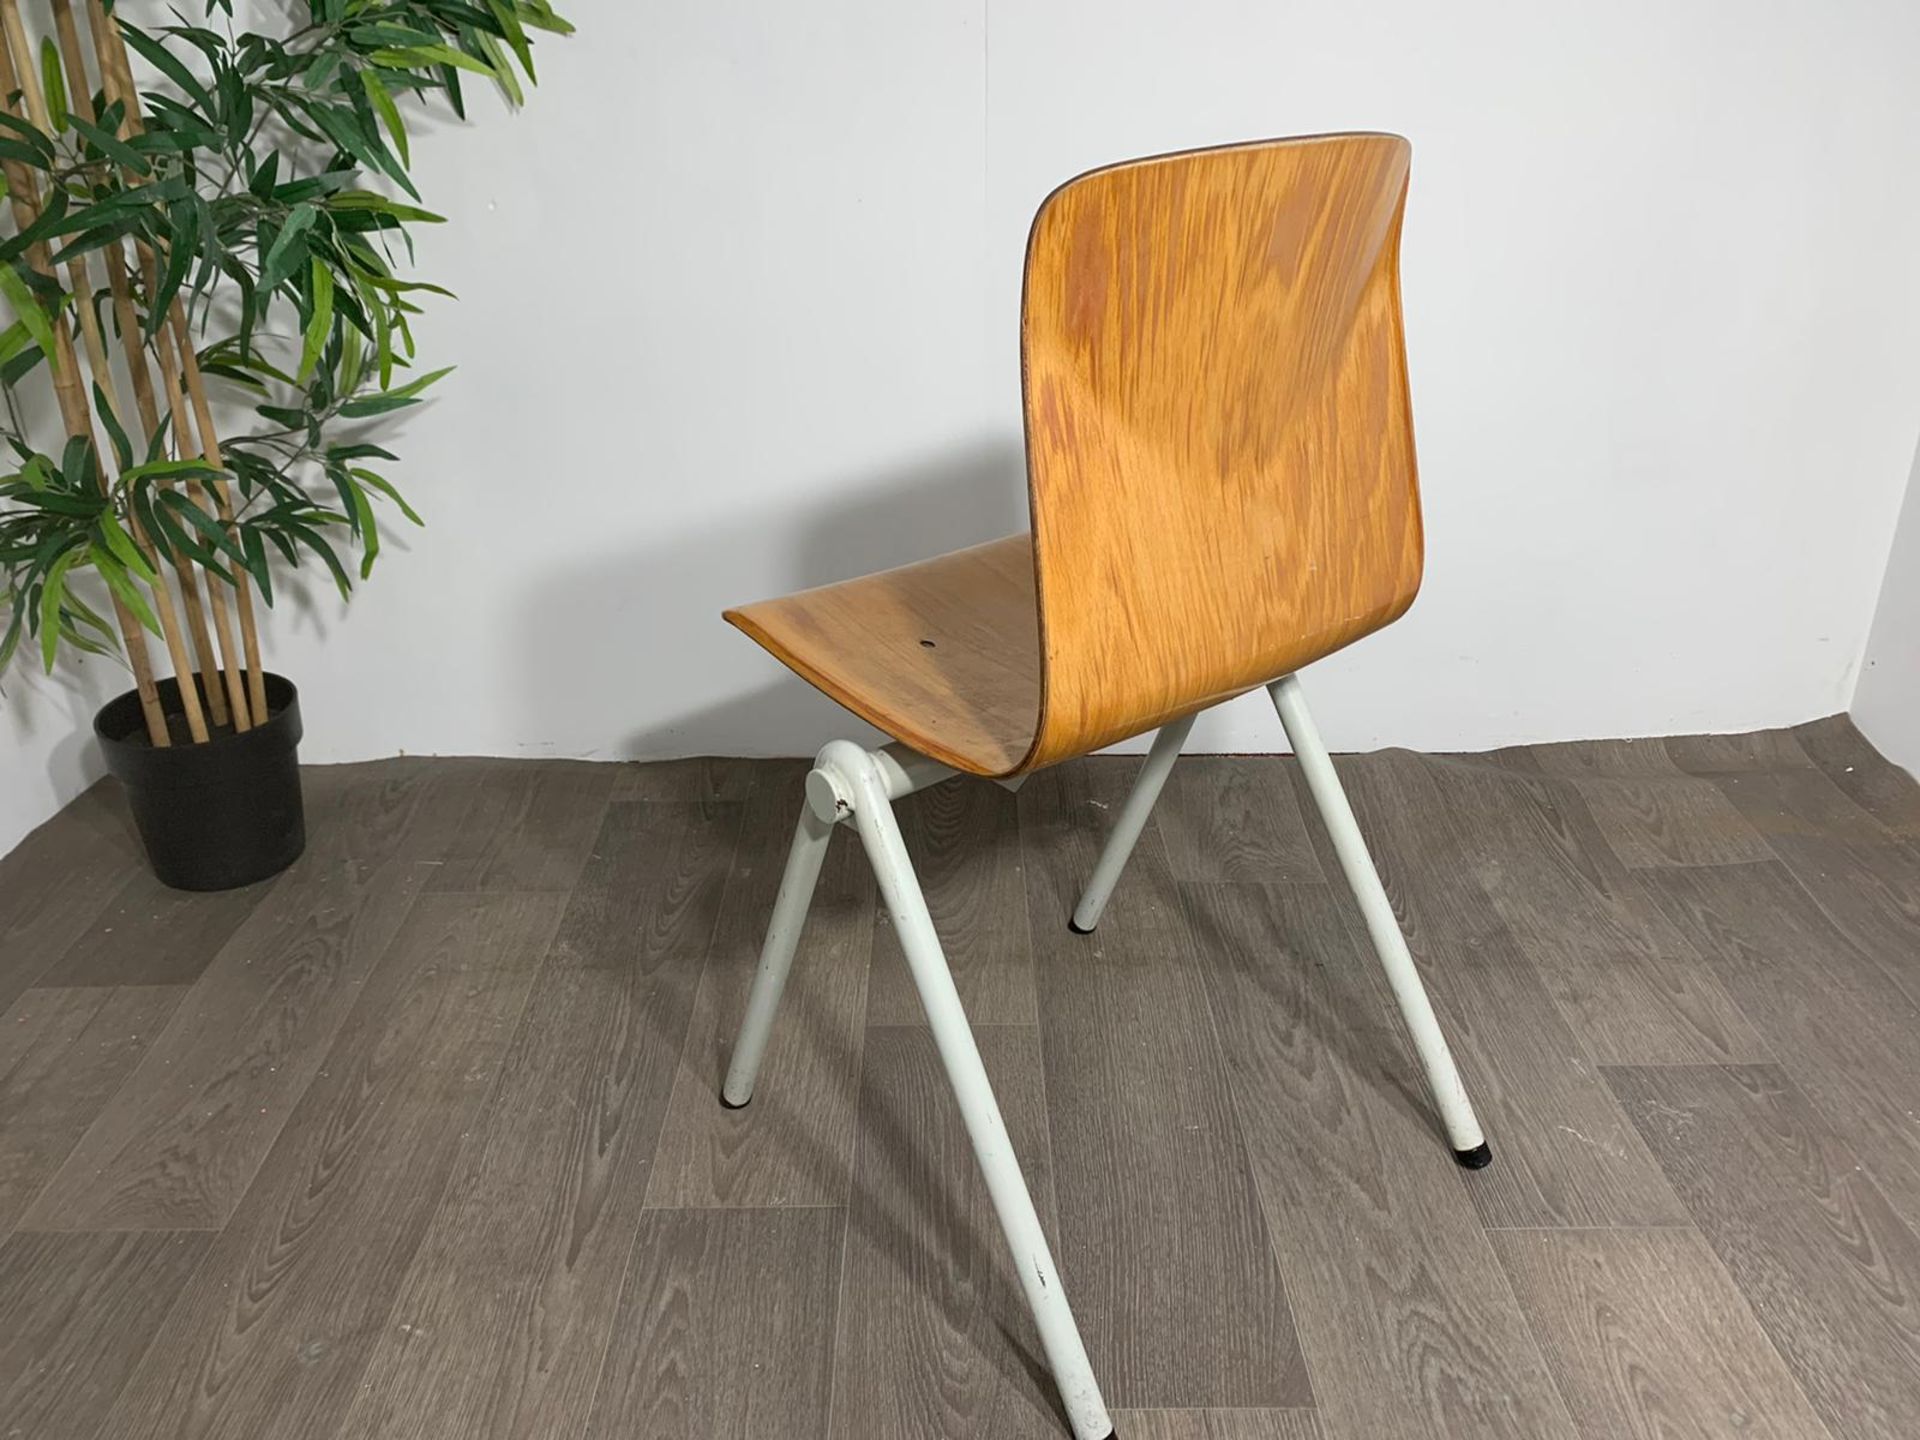 Mid Century Wooden Chair with Steel Legs - Image 3 of 10